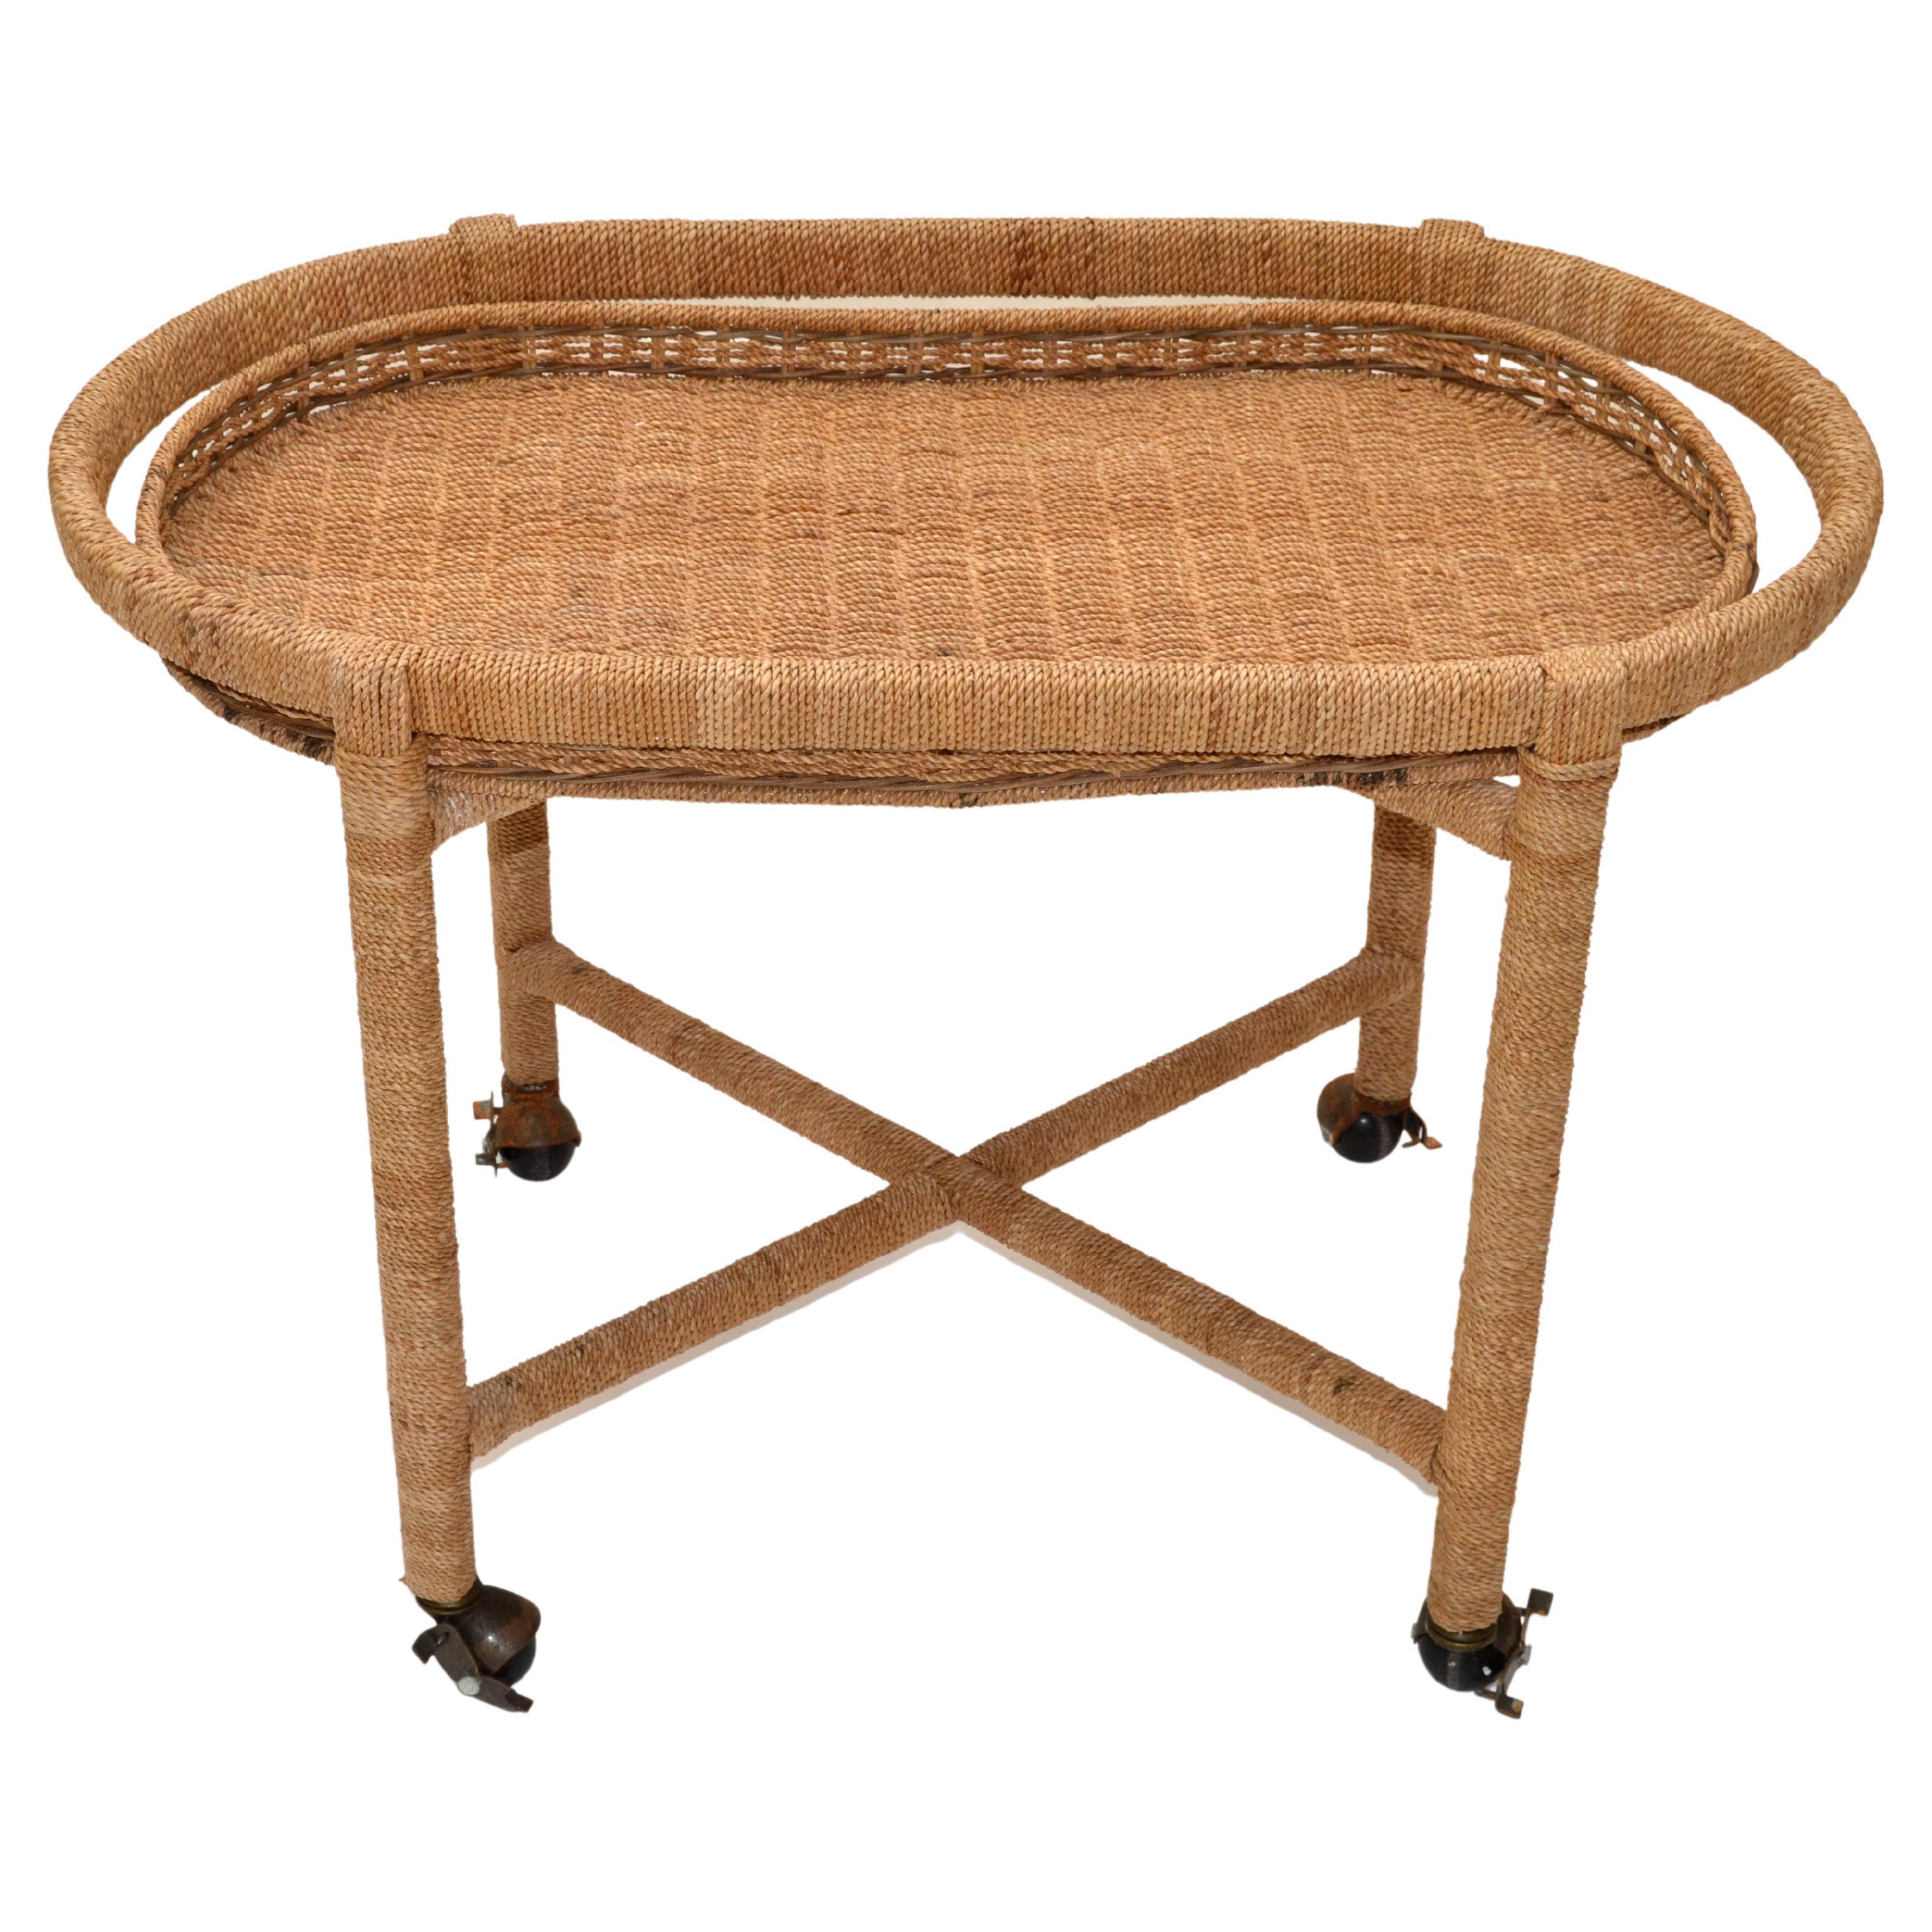 Vintage Mario Lopez Torres Style Rope Wicker Rattan Serving, Bar Cart Tray Table For Sale